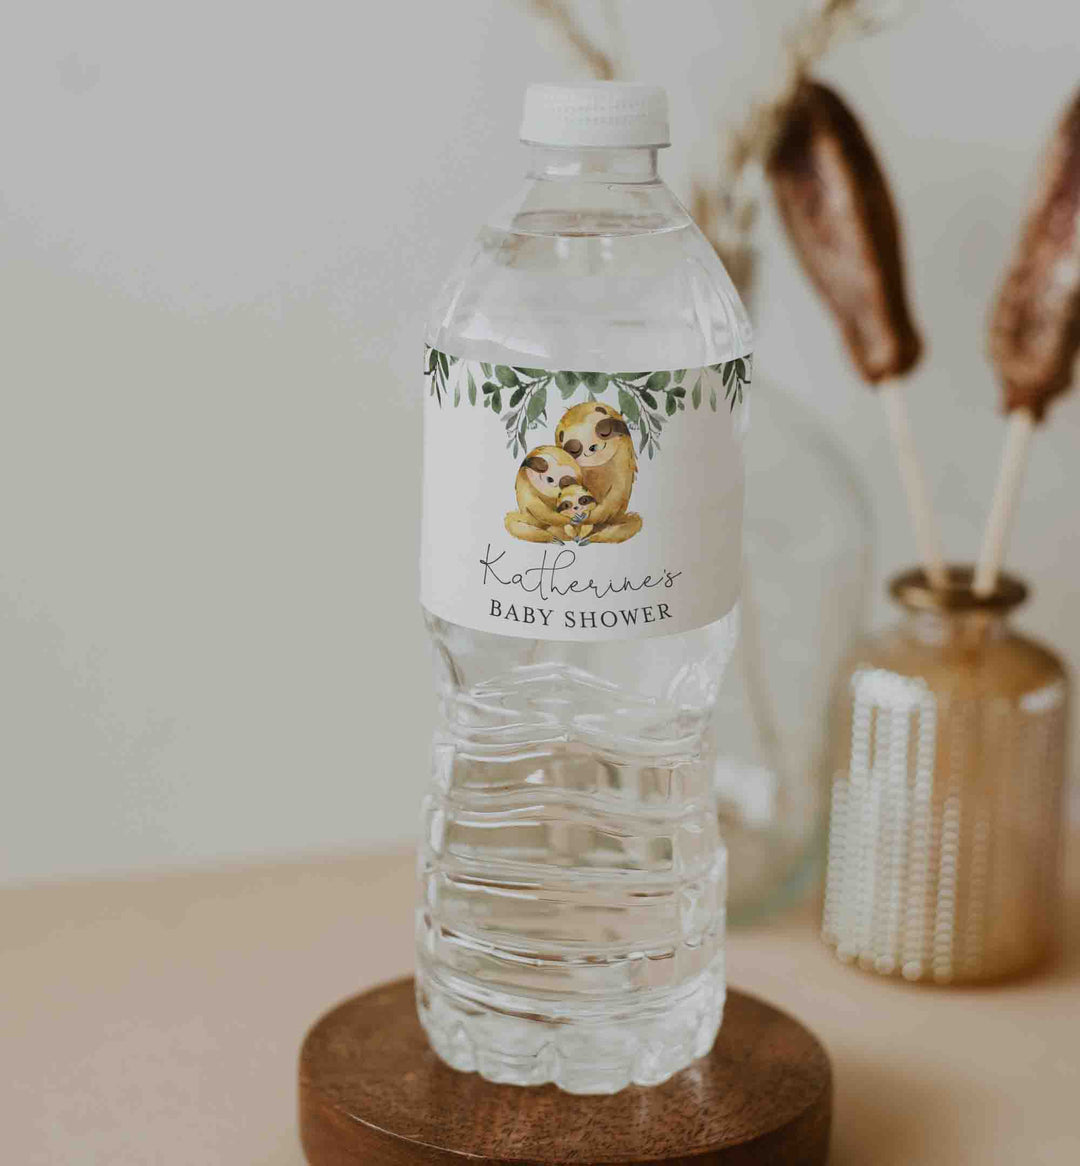 Sloth Family Baby Shower Water Bottle Label Printable